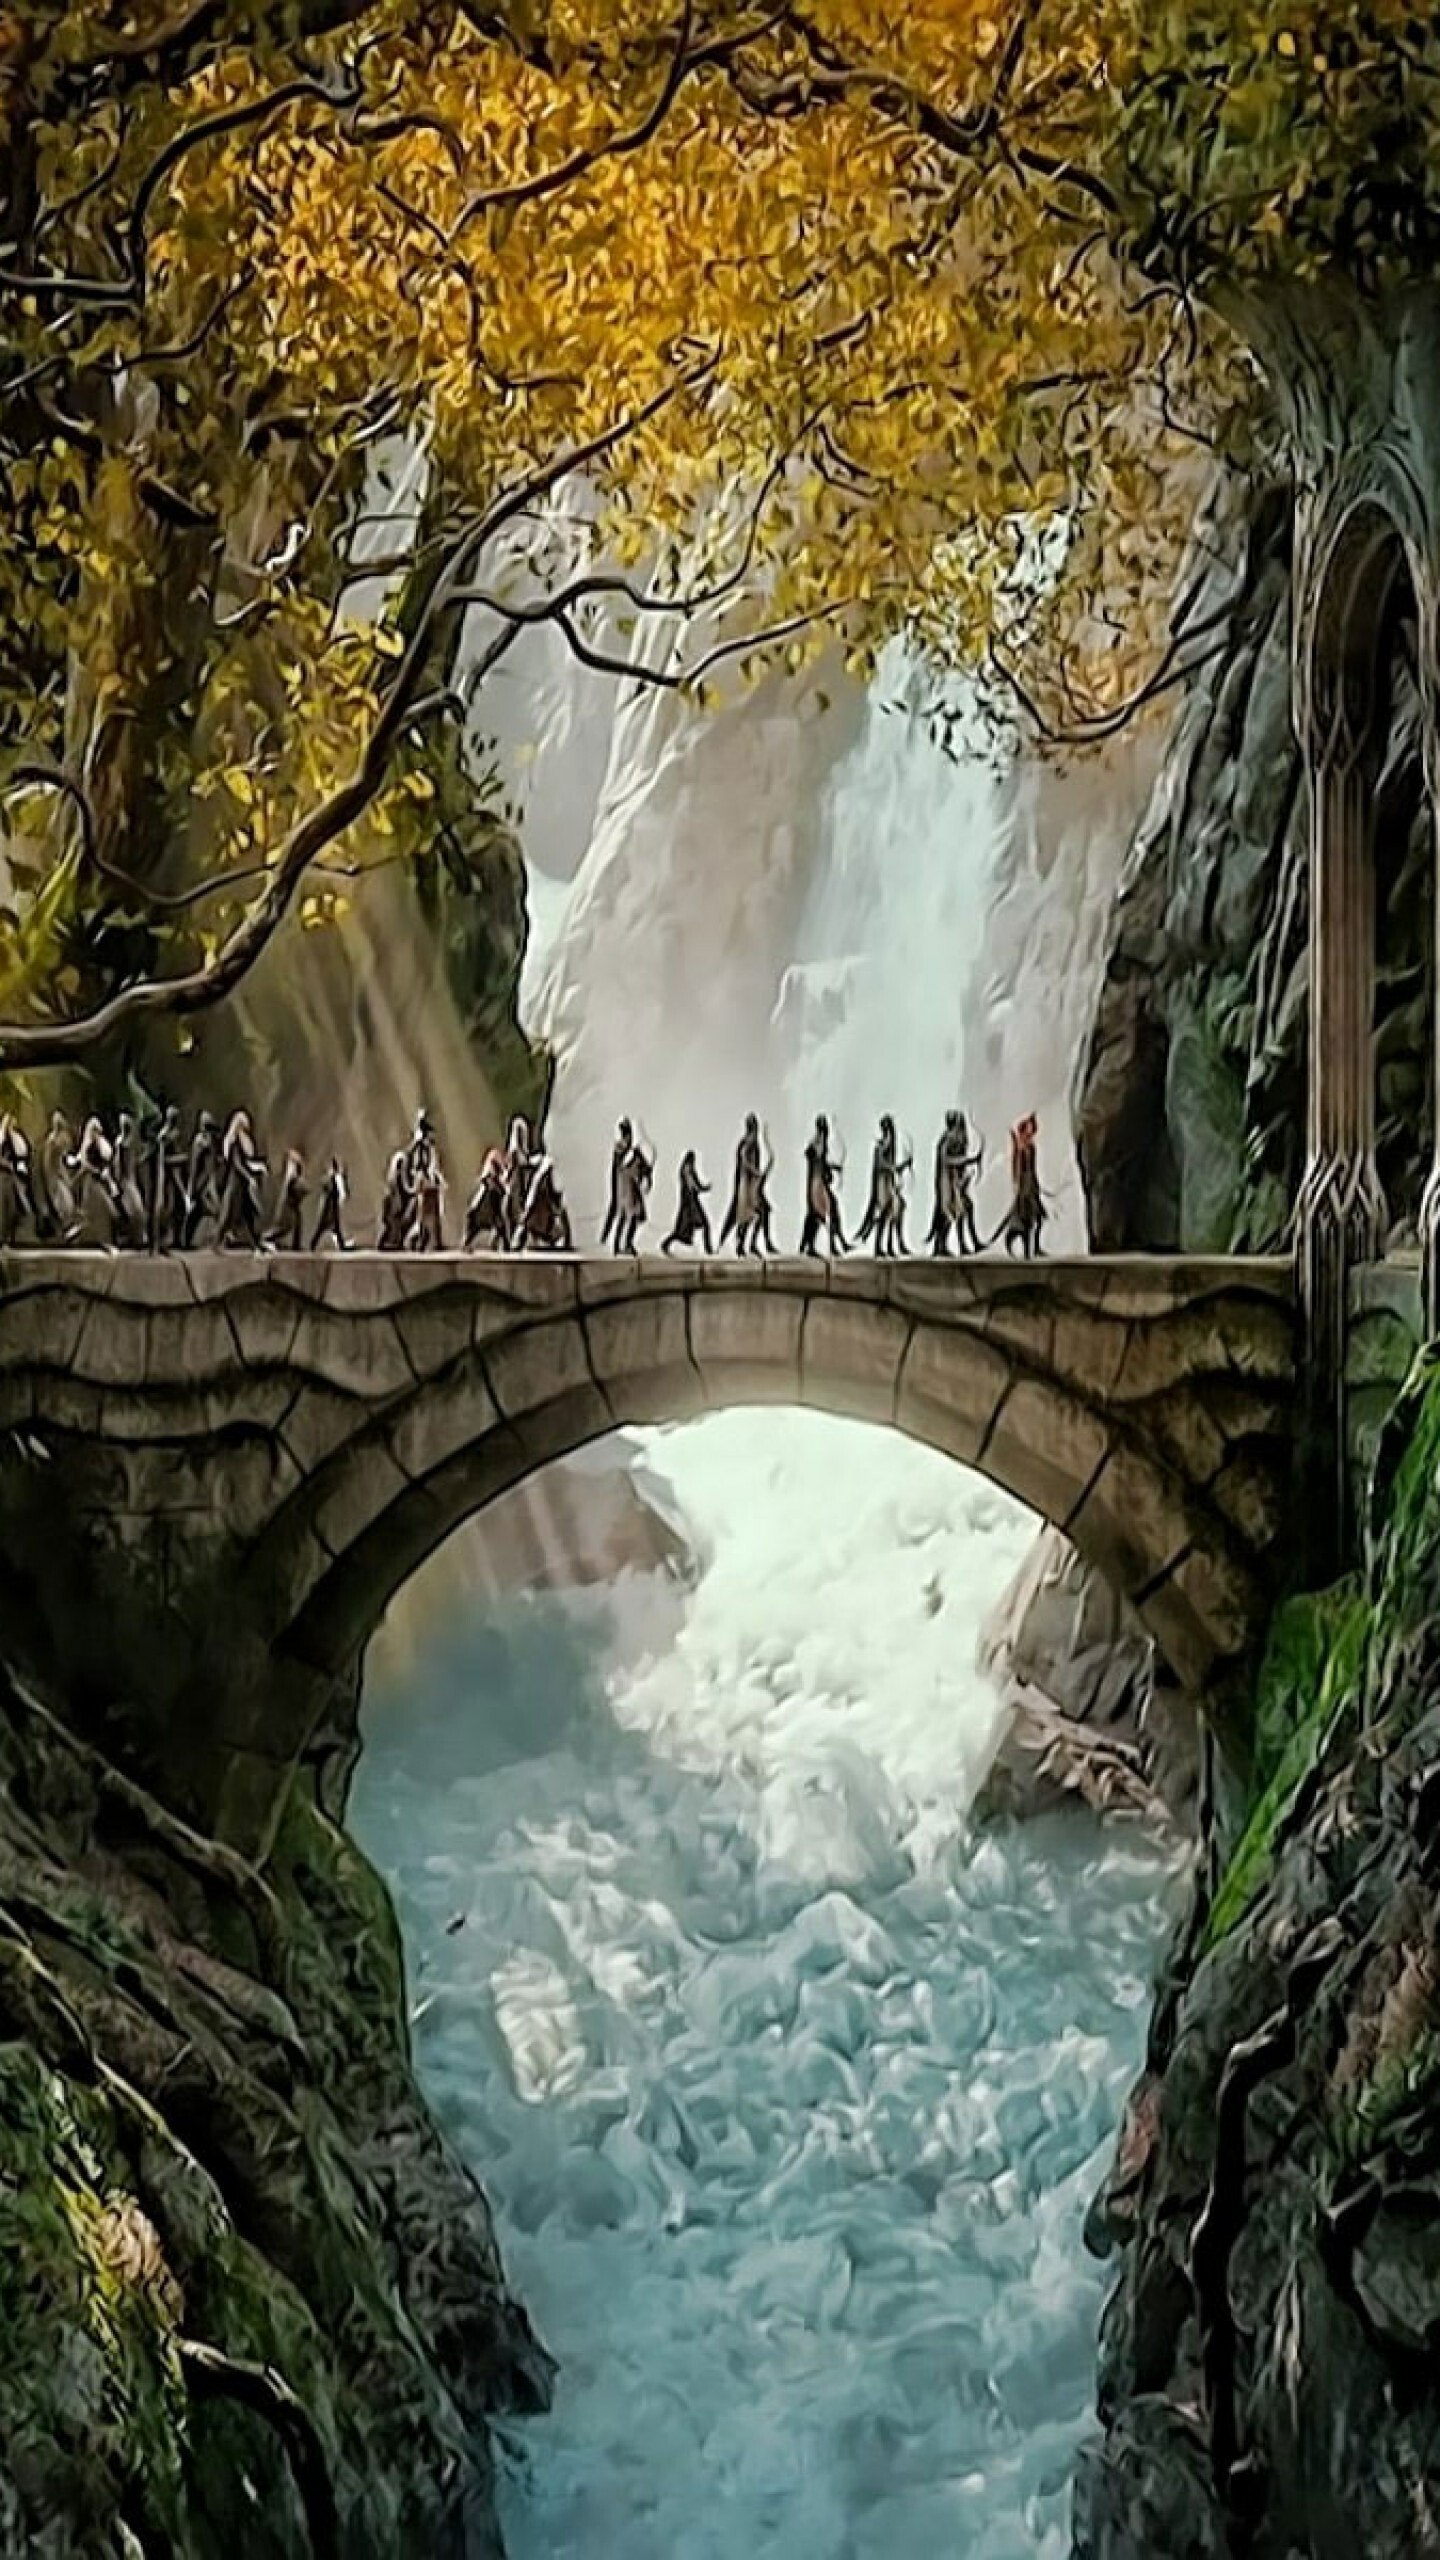 The Lord of the Rings: The Hobbit: The Desolation of Smaug, A 2013 epic high fantasy adventure film directed by Peter Jackson. 1440x2560 HD Background.